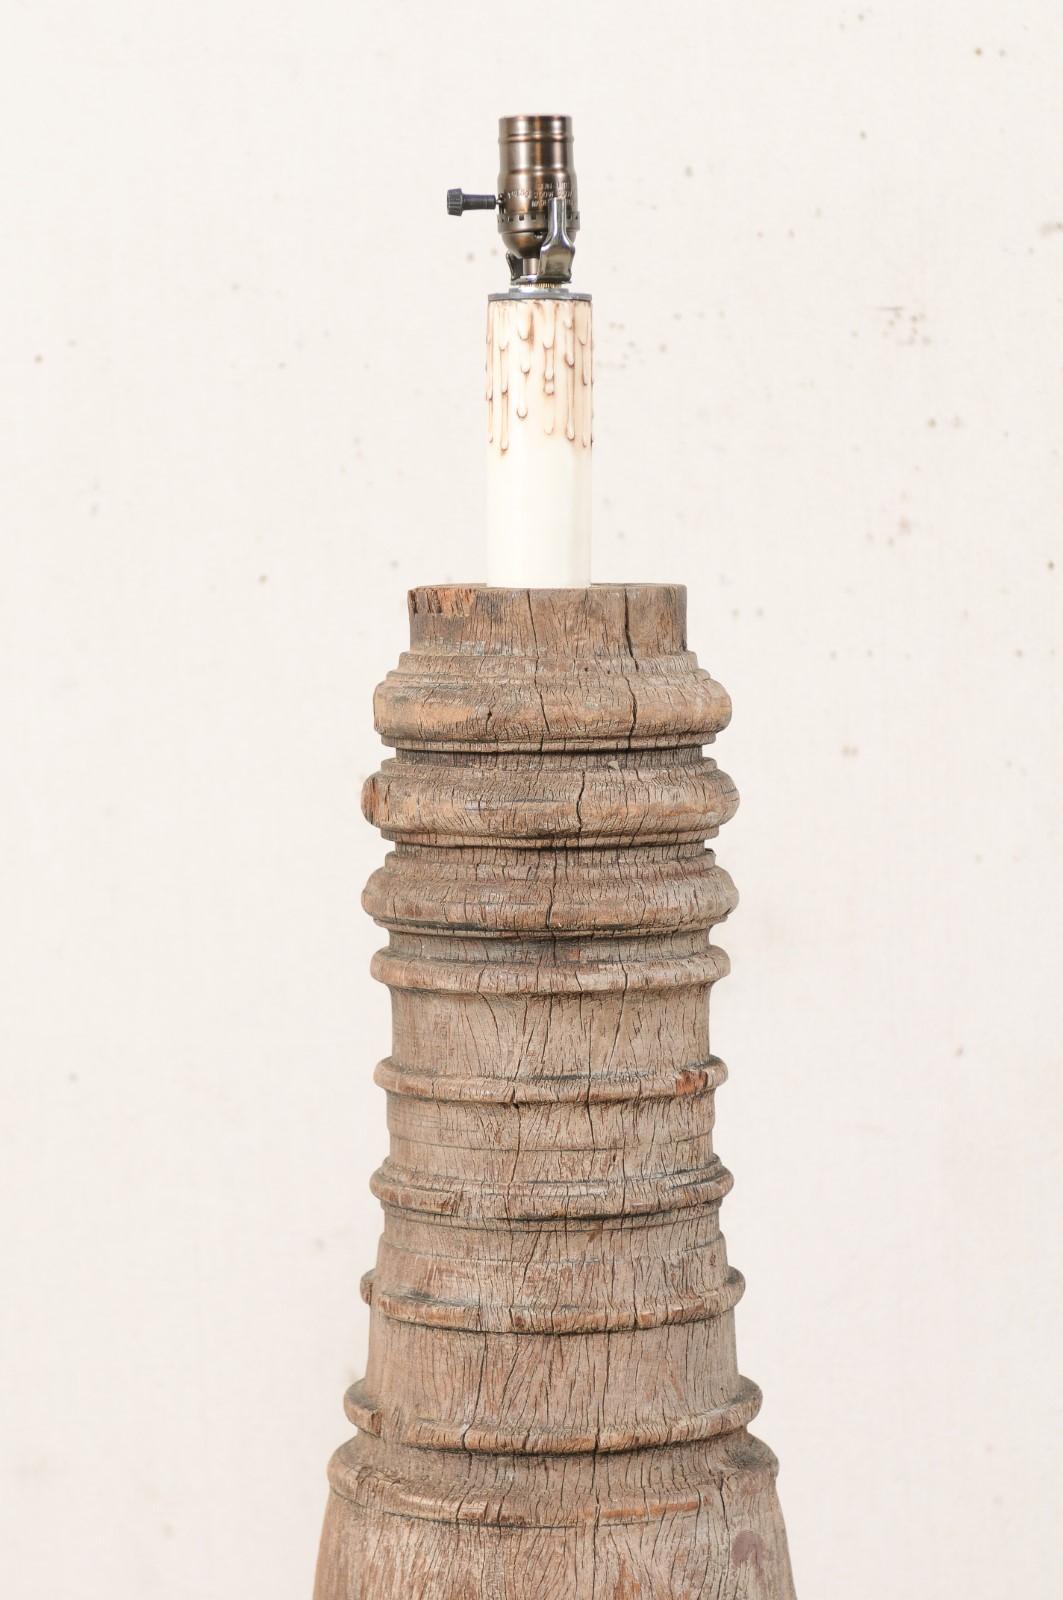 Iron Tall British Colonial Table Lamp from the 19th Century